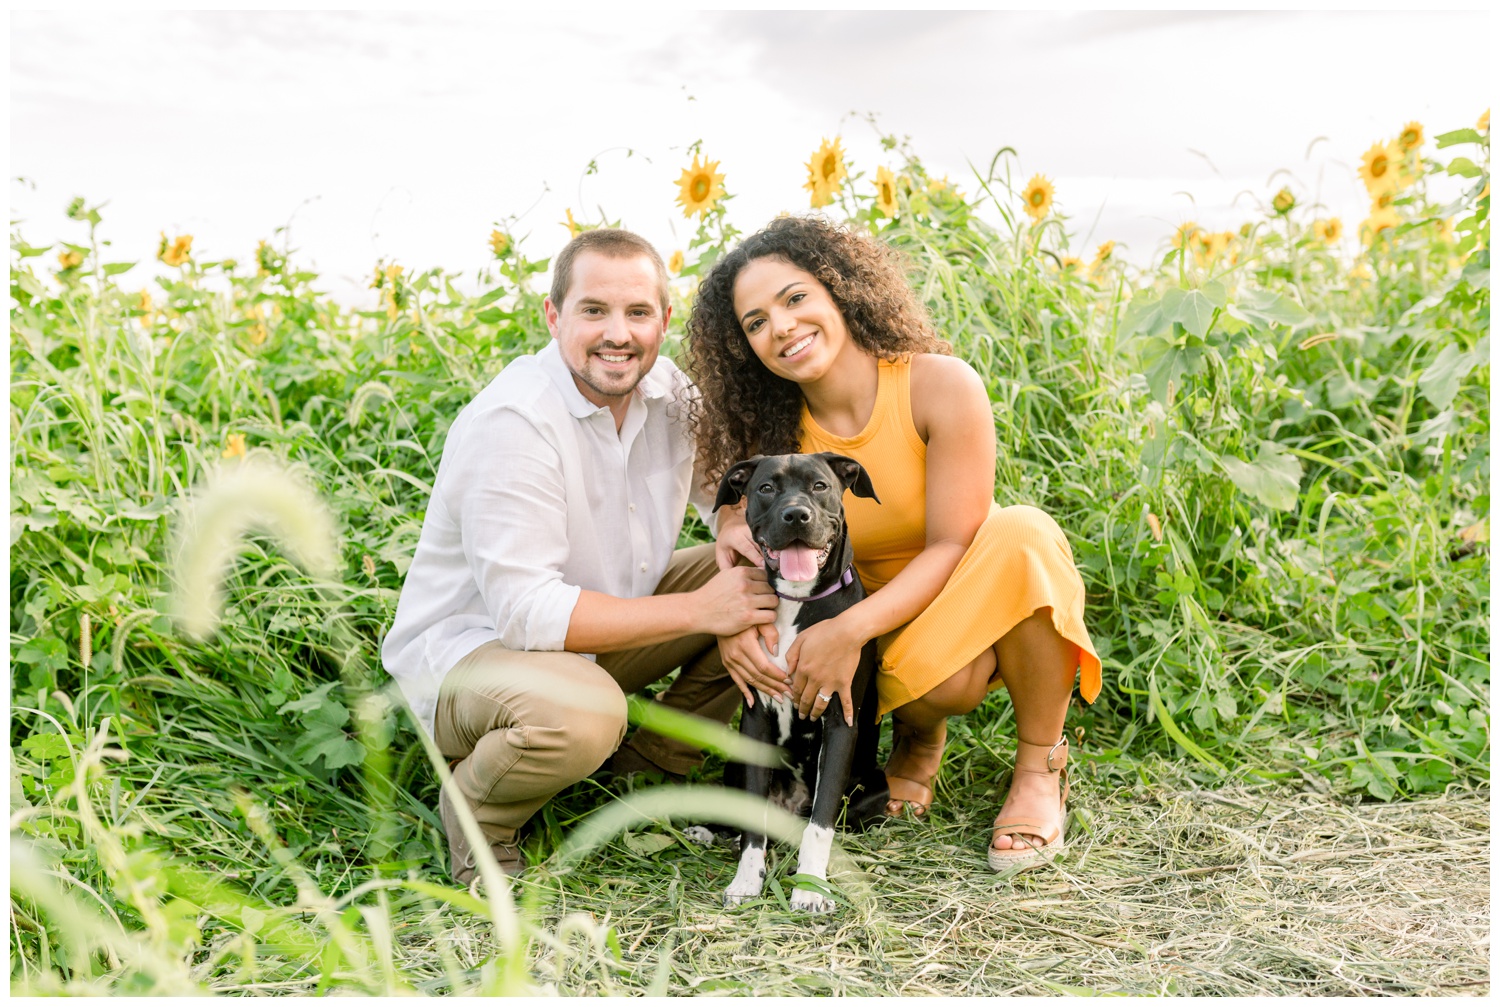 Engagement Photos with Dog in Sunflower Field at Cottell Park